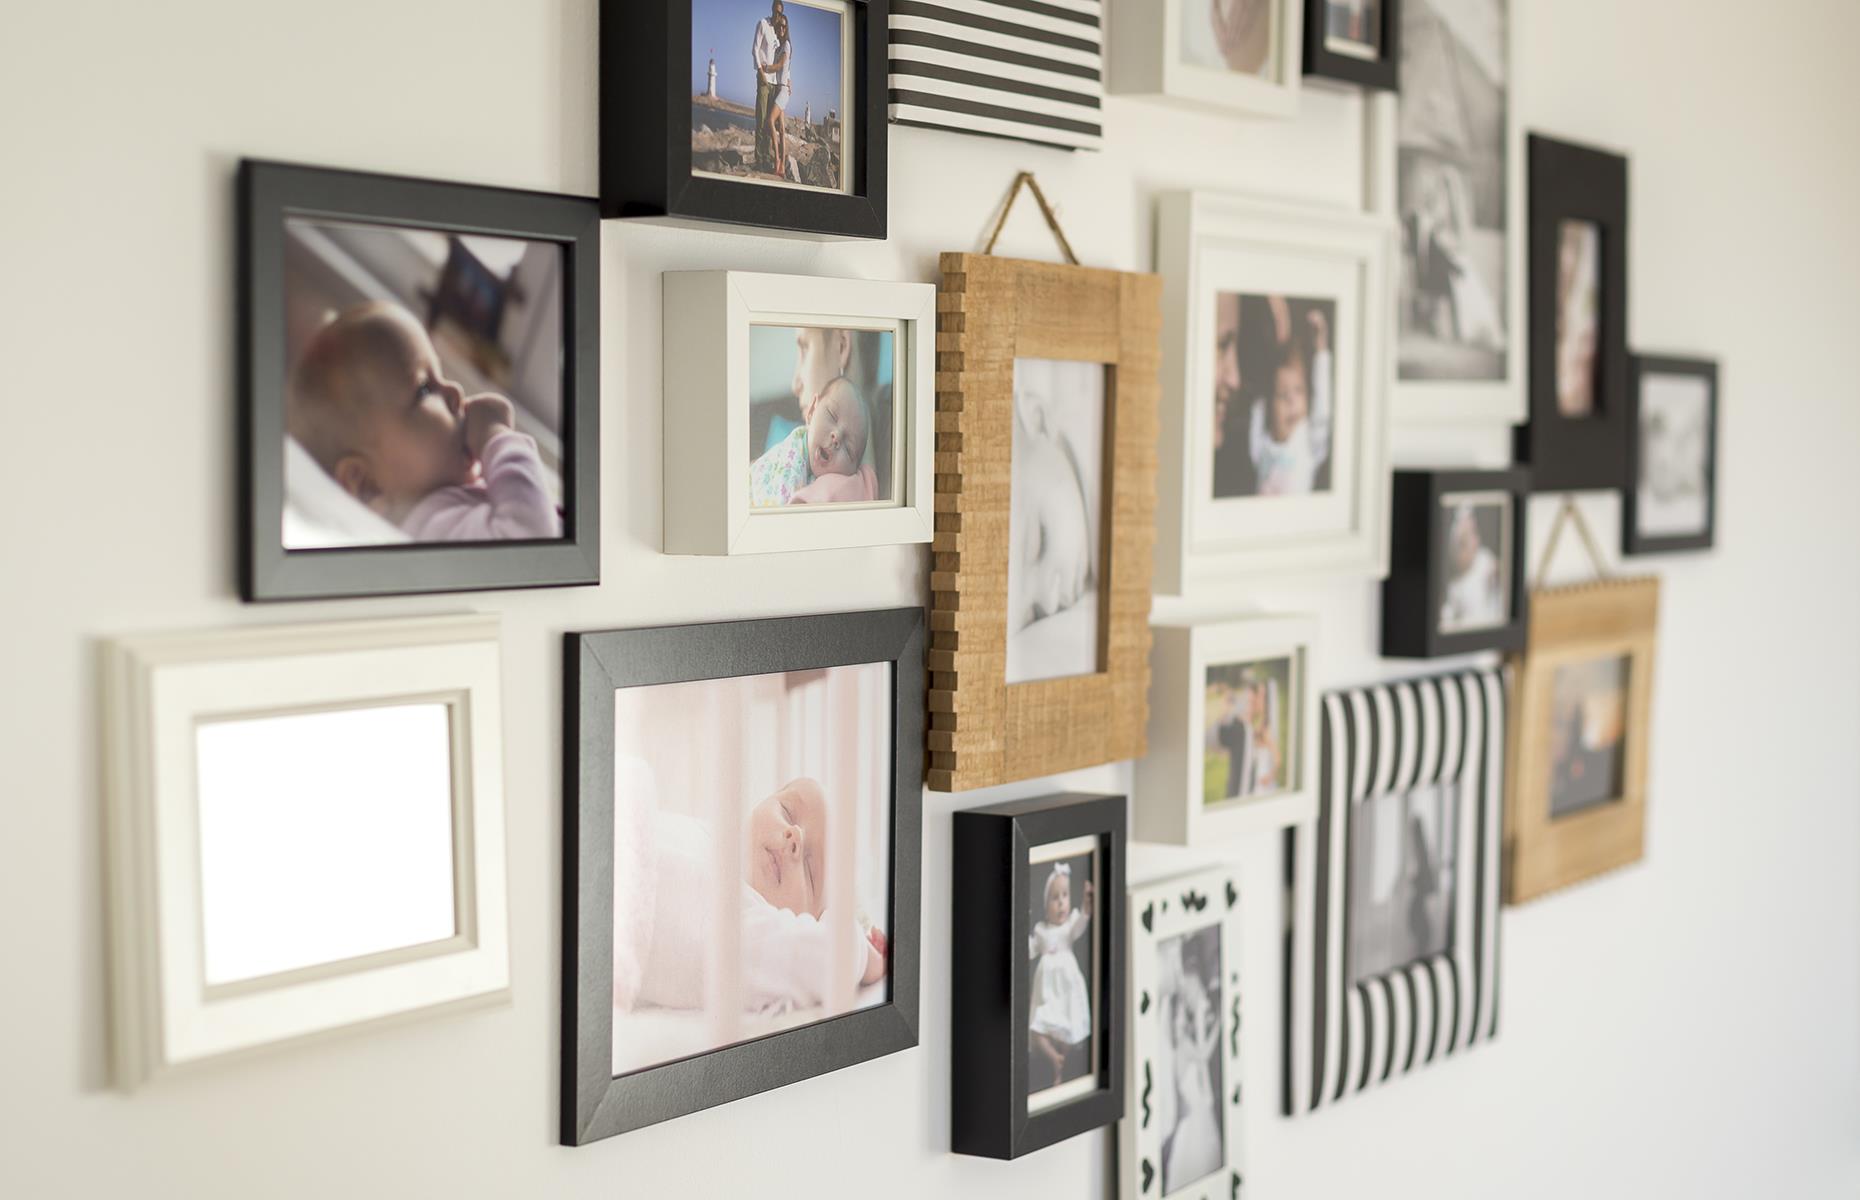 <p>A gallery wall for pictures of all your important people, past and present, is a beautiful way to make a house a home. Whether you have it running up the staircase, or displayed in the front room, it's something you can really individualize to work as a memory board and a stunning design feature.</p>